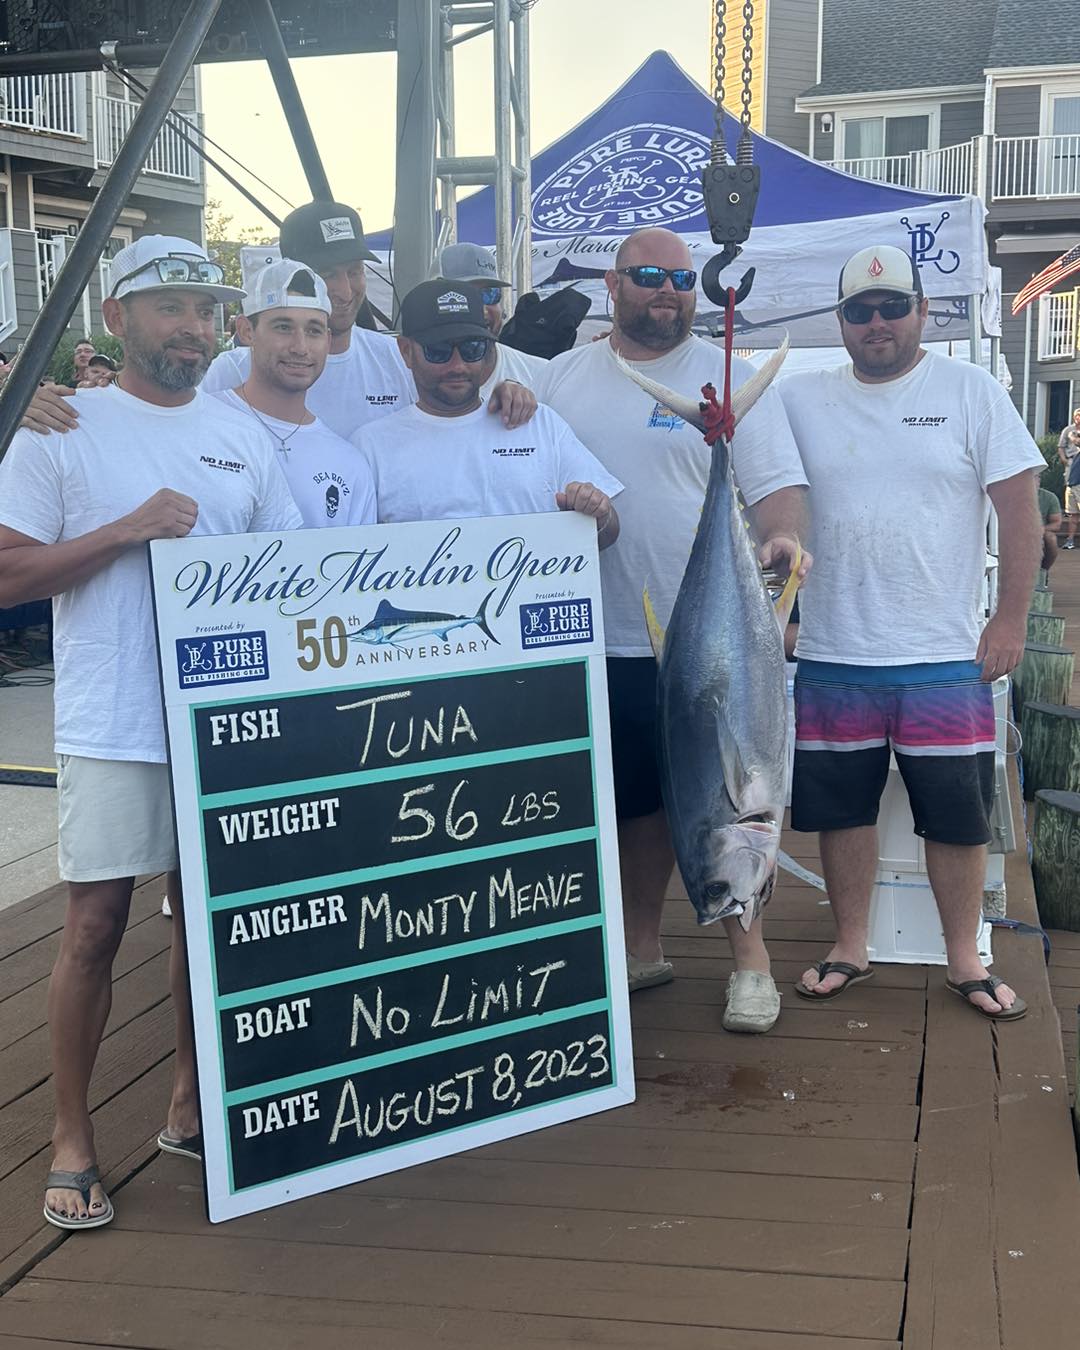 10 – 12 Foot Seas, But $70,000 Tuna Hits Board for Day 2 of The 50th White Marlin Open